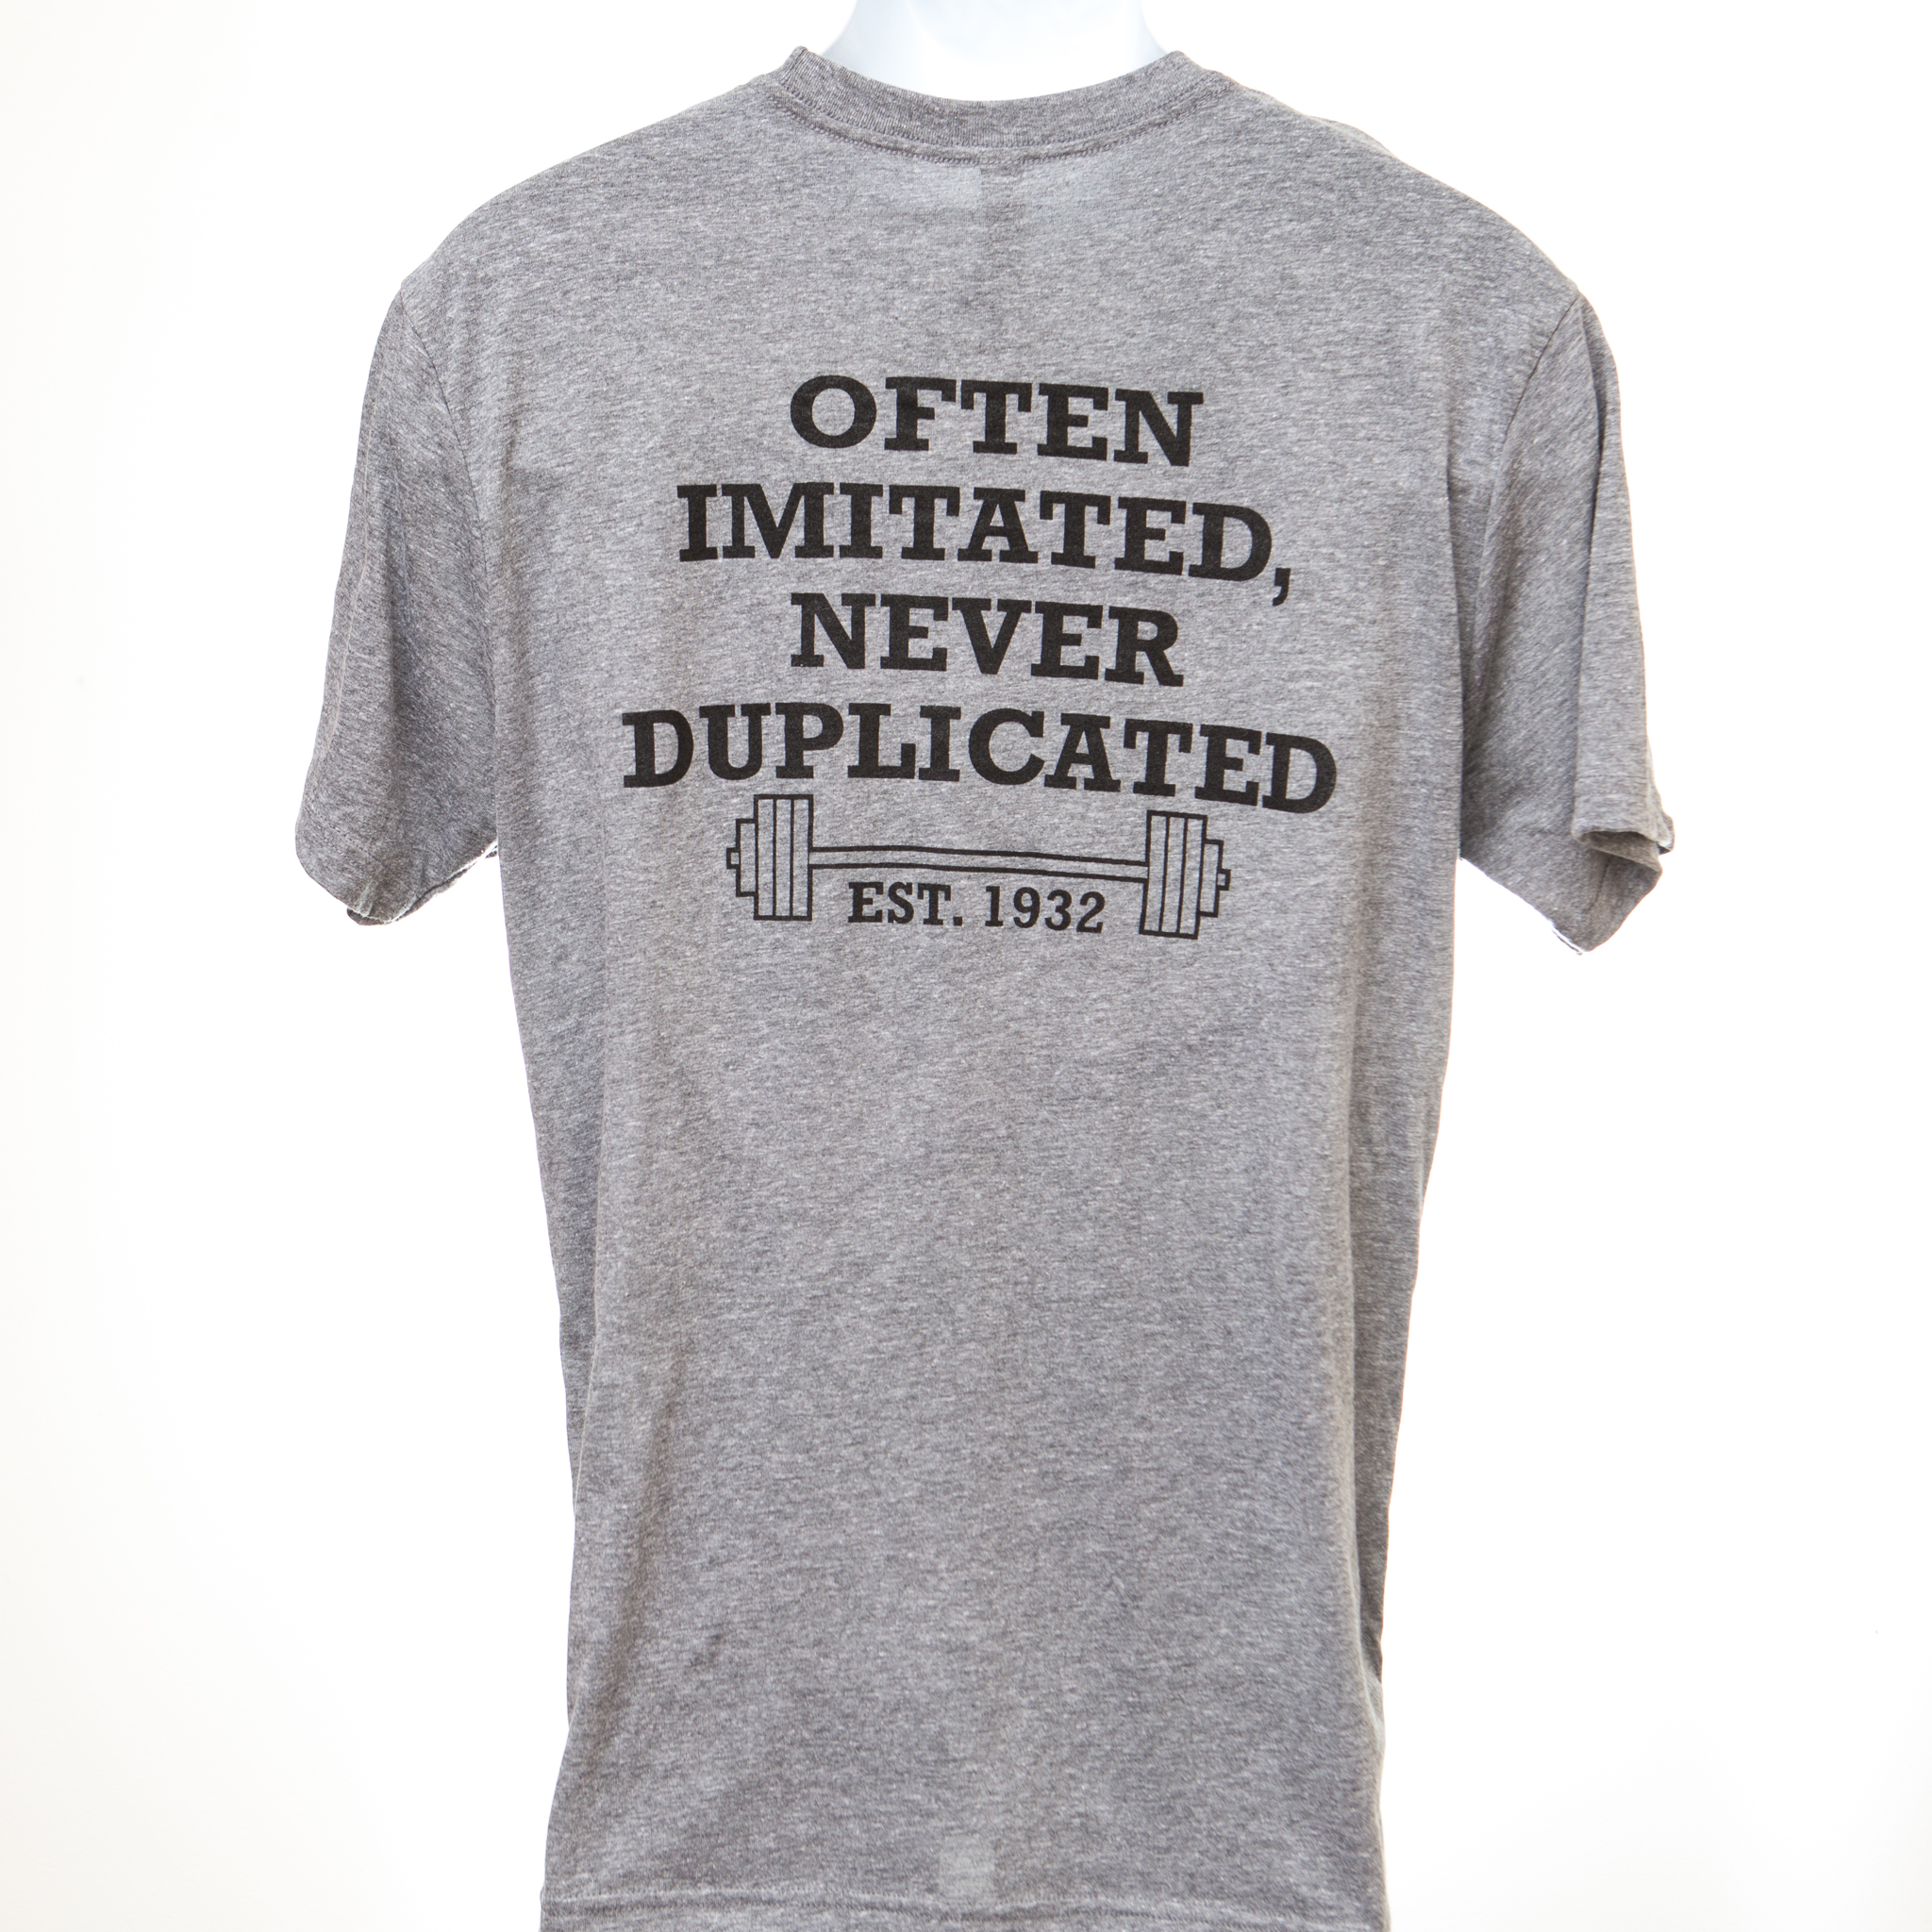 Often Imitated, Never Duplicated Tee | Gym Apparel l York Barbell